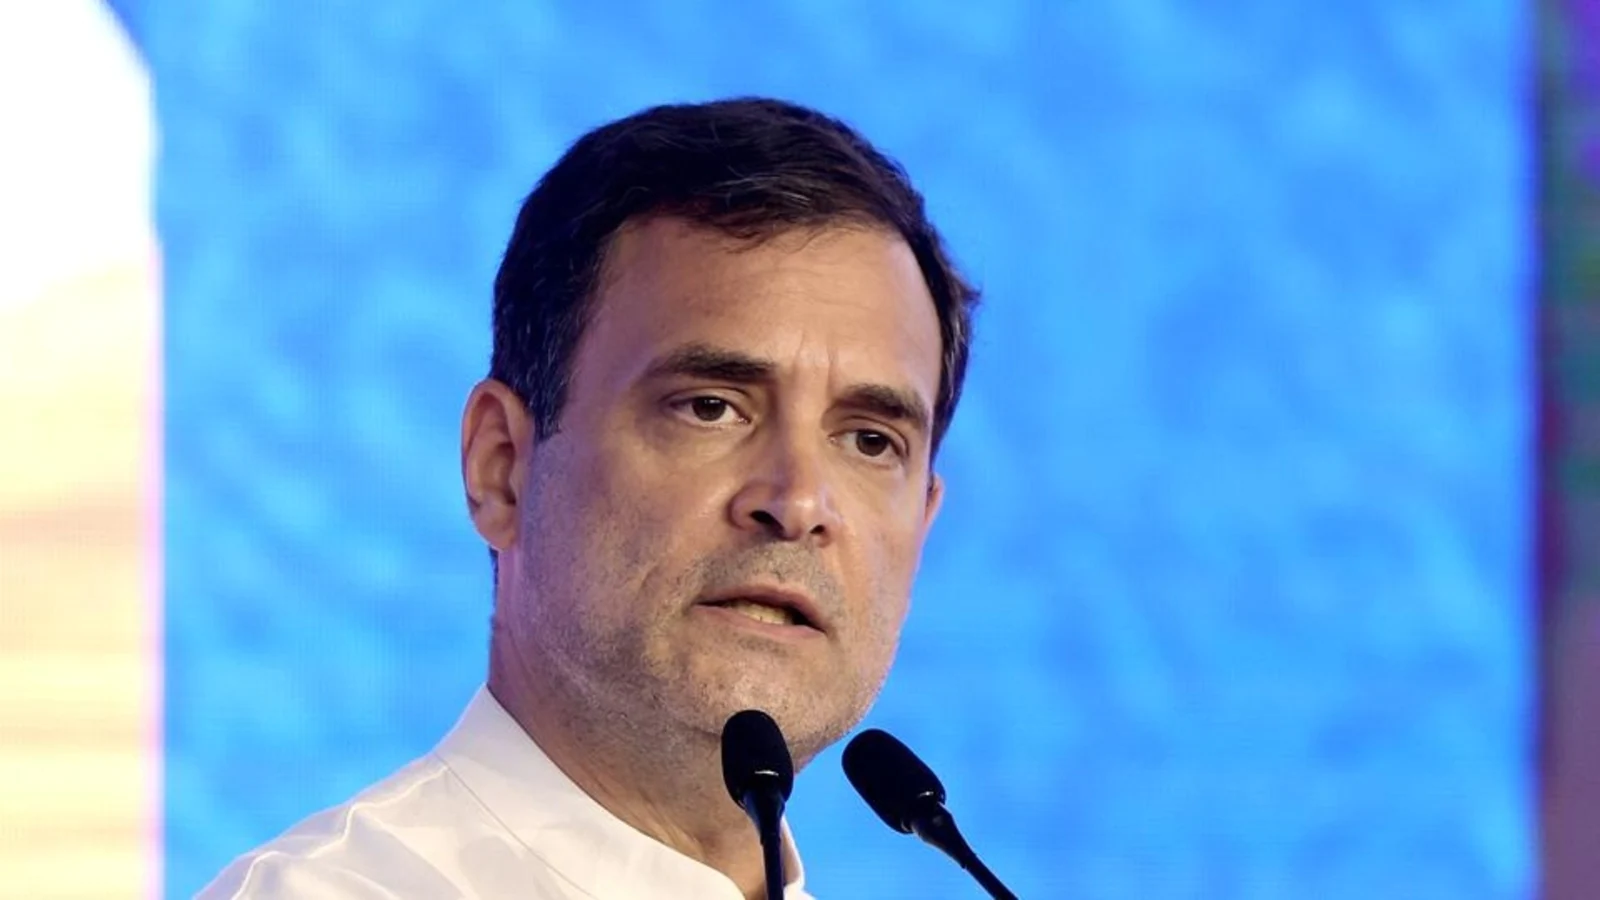 ‘4th pillar of democracy dismantled in the lockup’: Rahul Gandhi on journalists forced to stripped semi-naked in MP